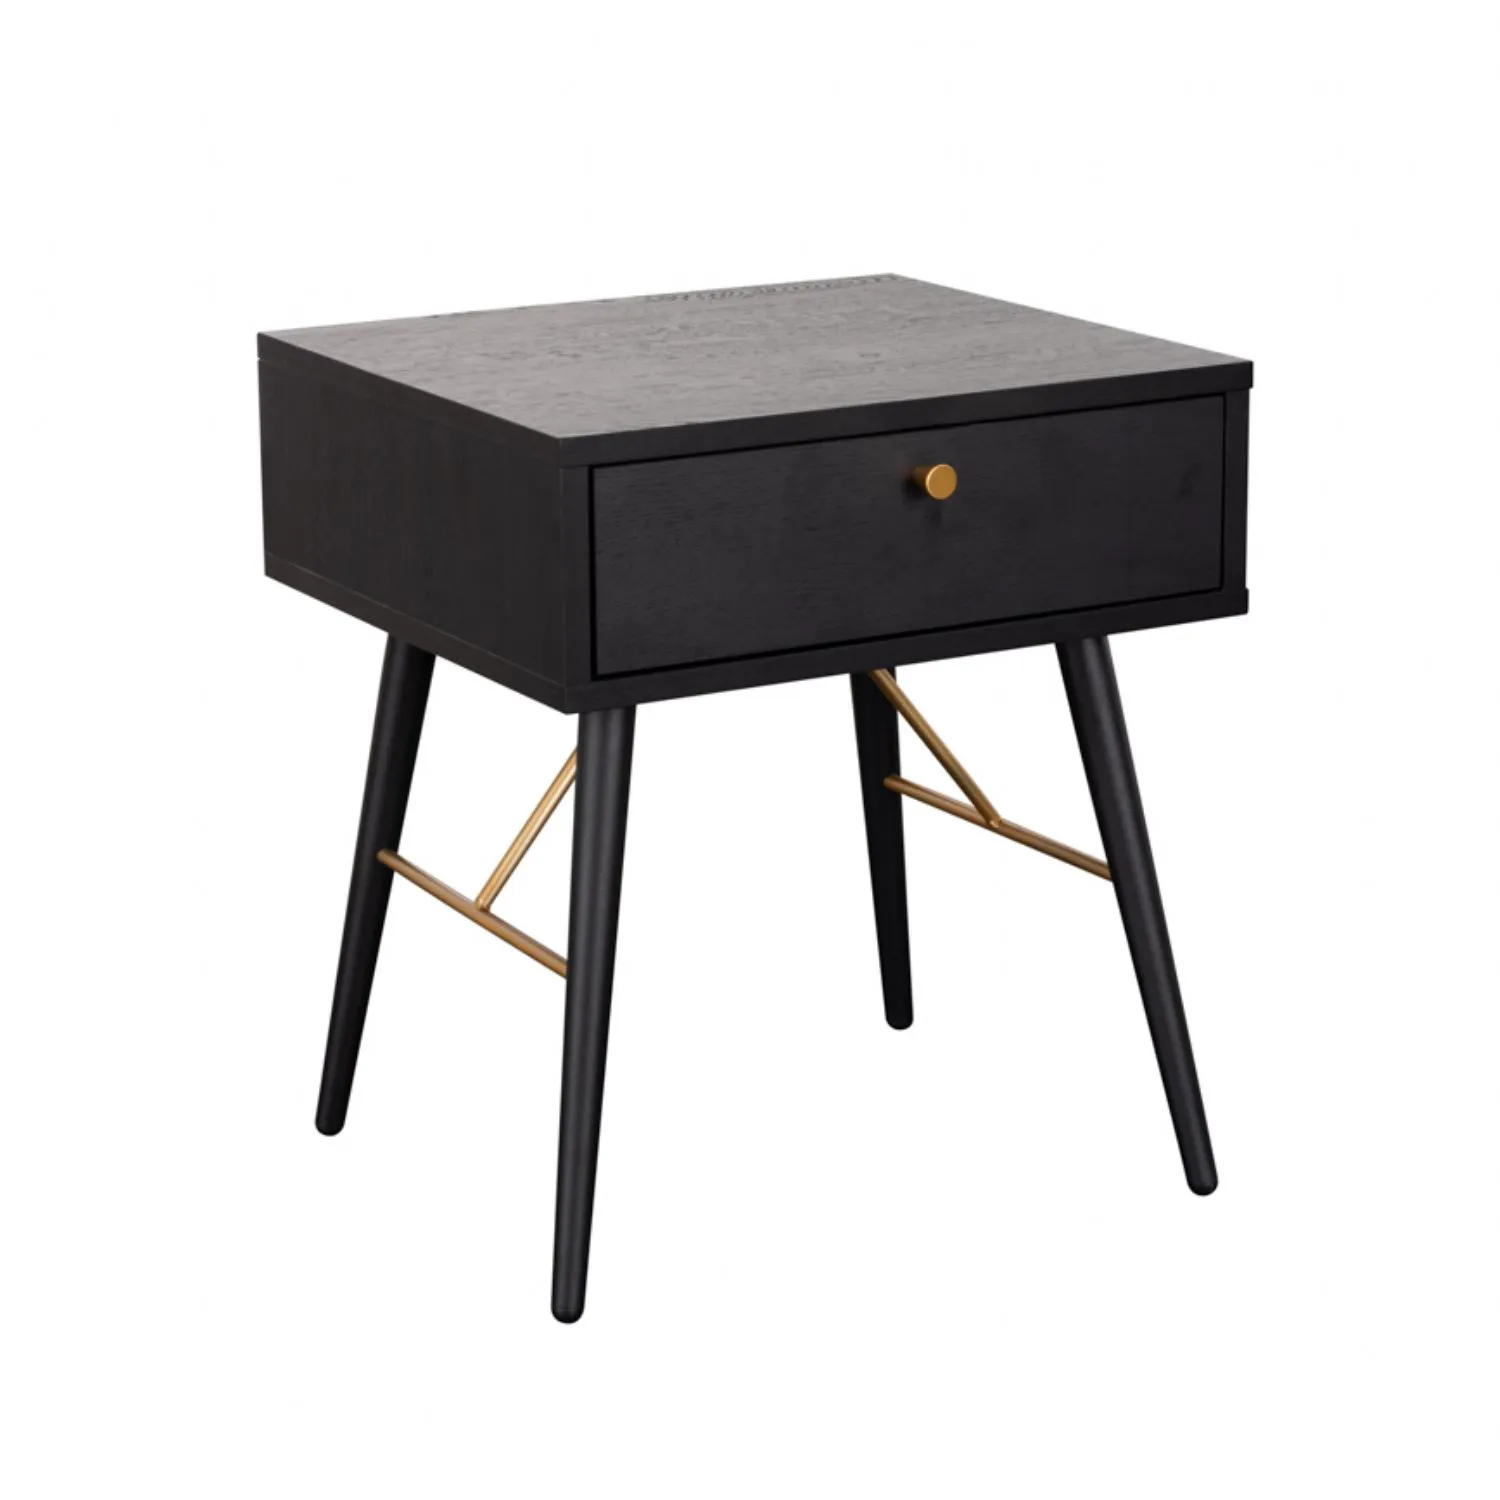 Black and Copper 1 Drawer Bedside Table Metal Legs